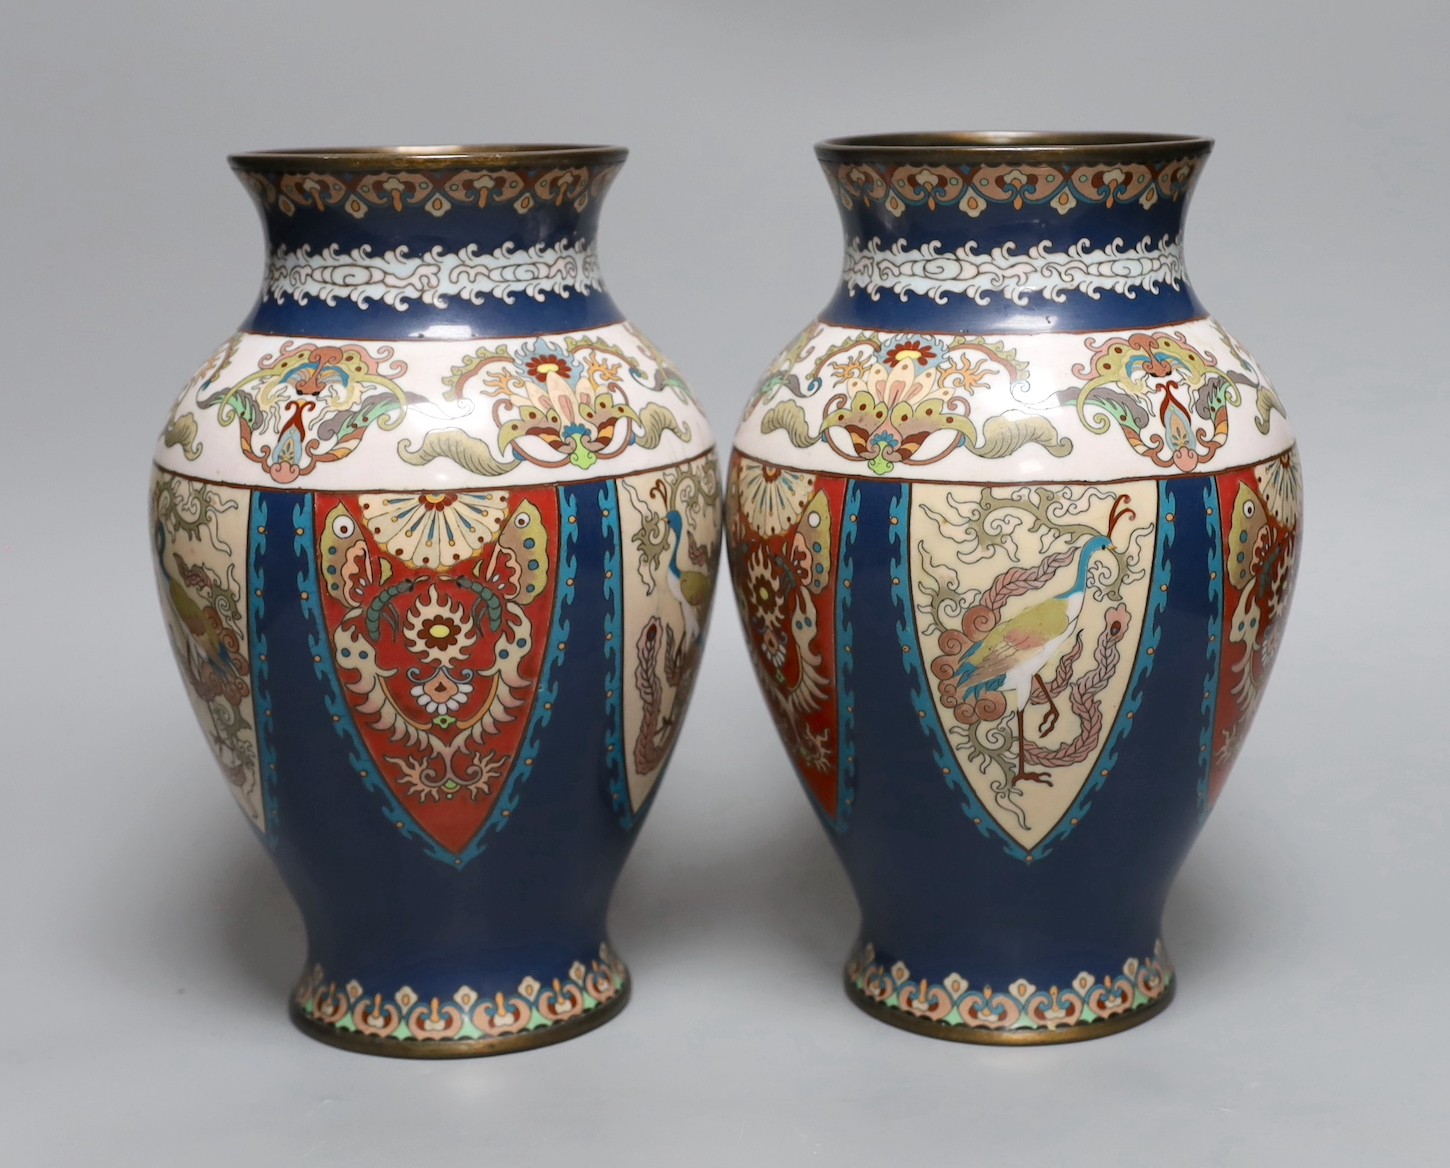 A pair of Japanese cloisonné enamel vases, probably Kyoto, early 20th century, 25cms high